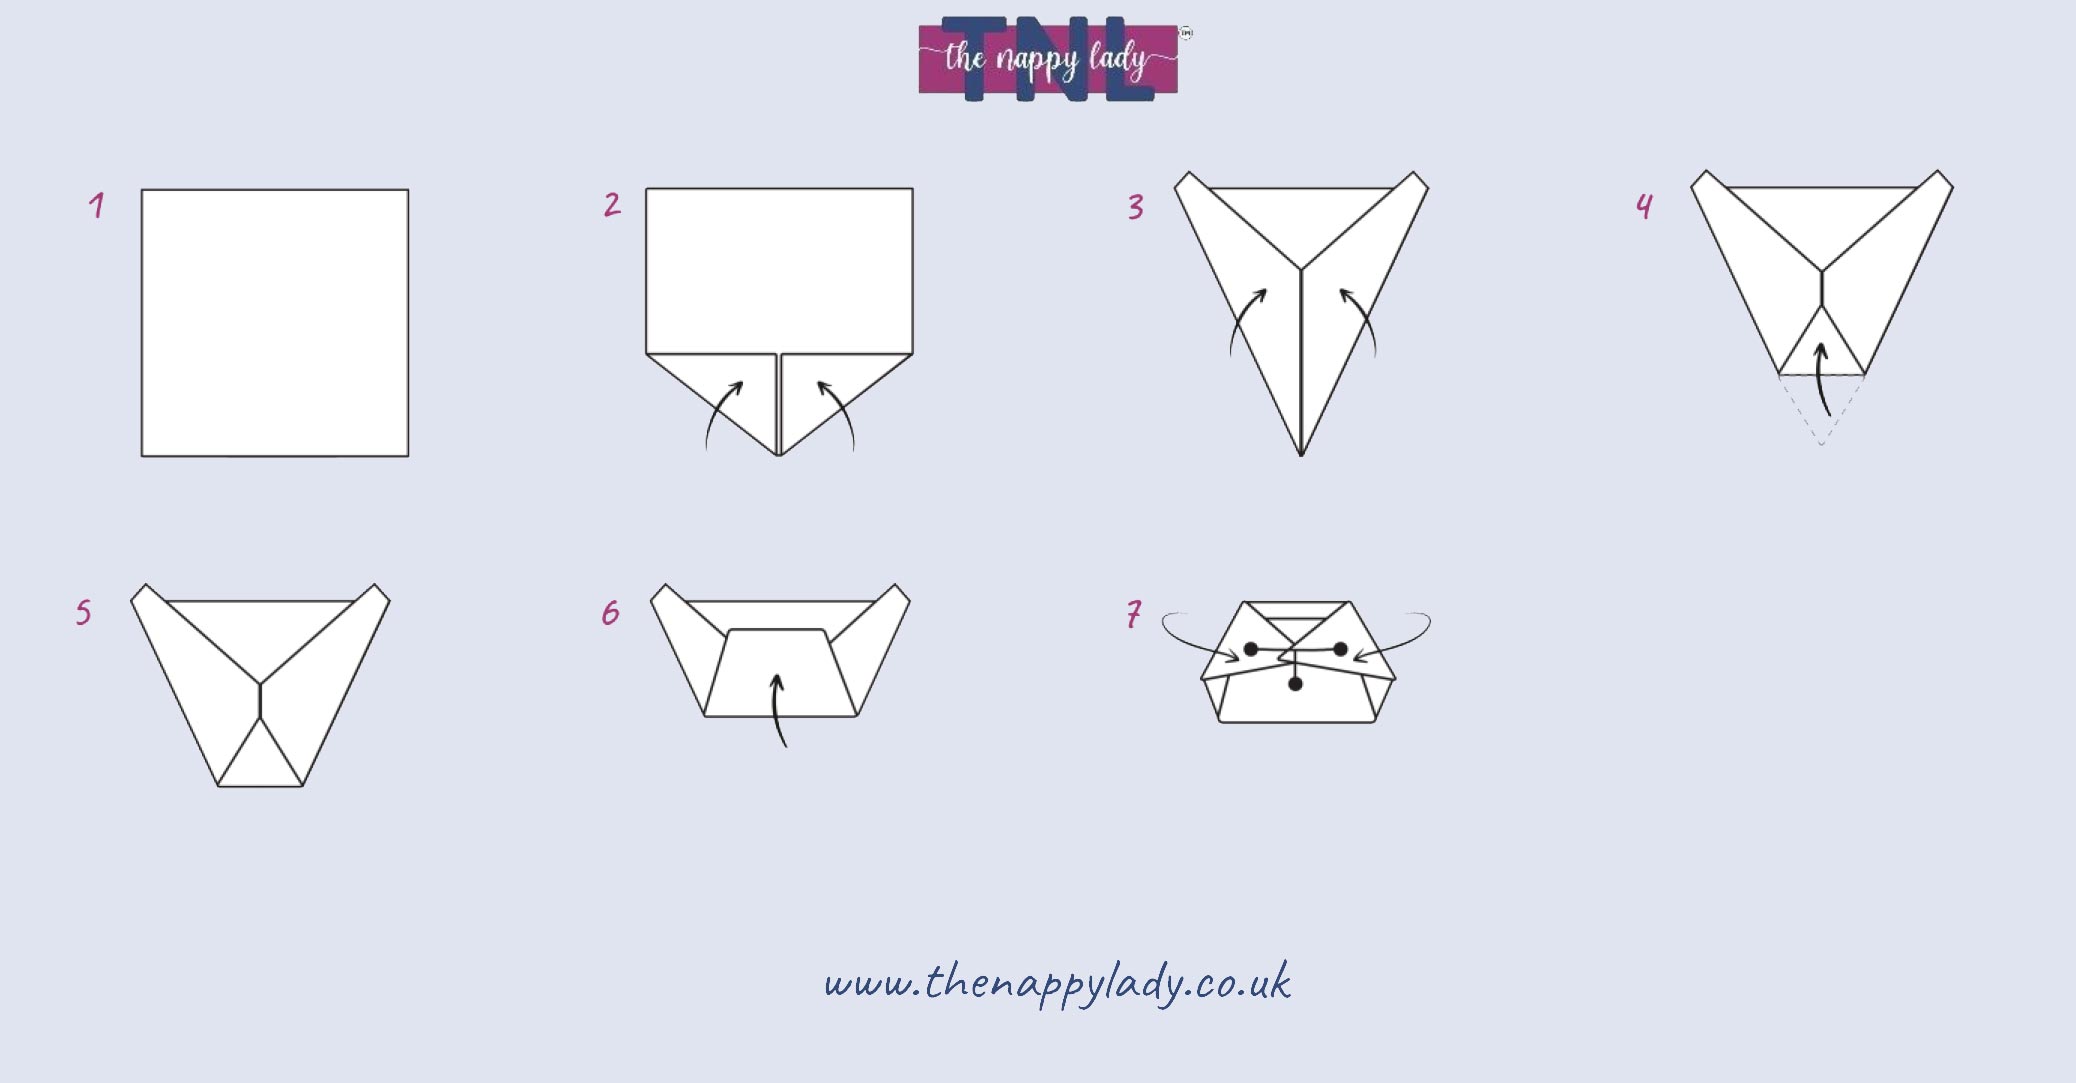 folding guide for the concorde terry nappy fold